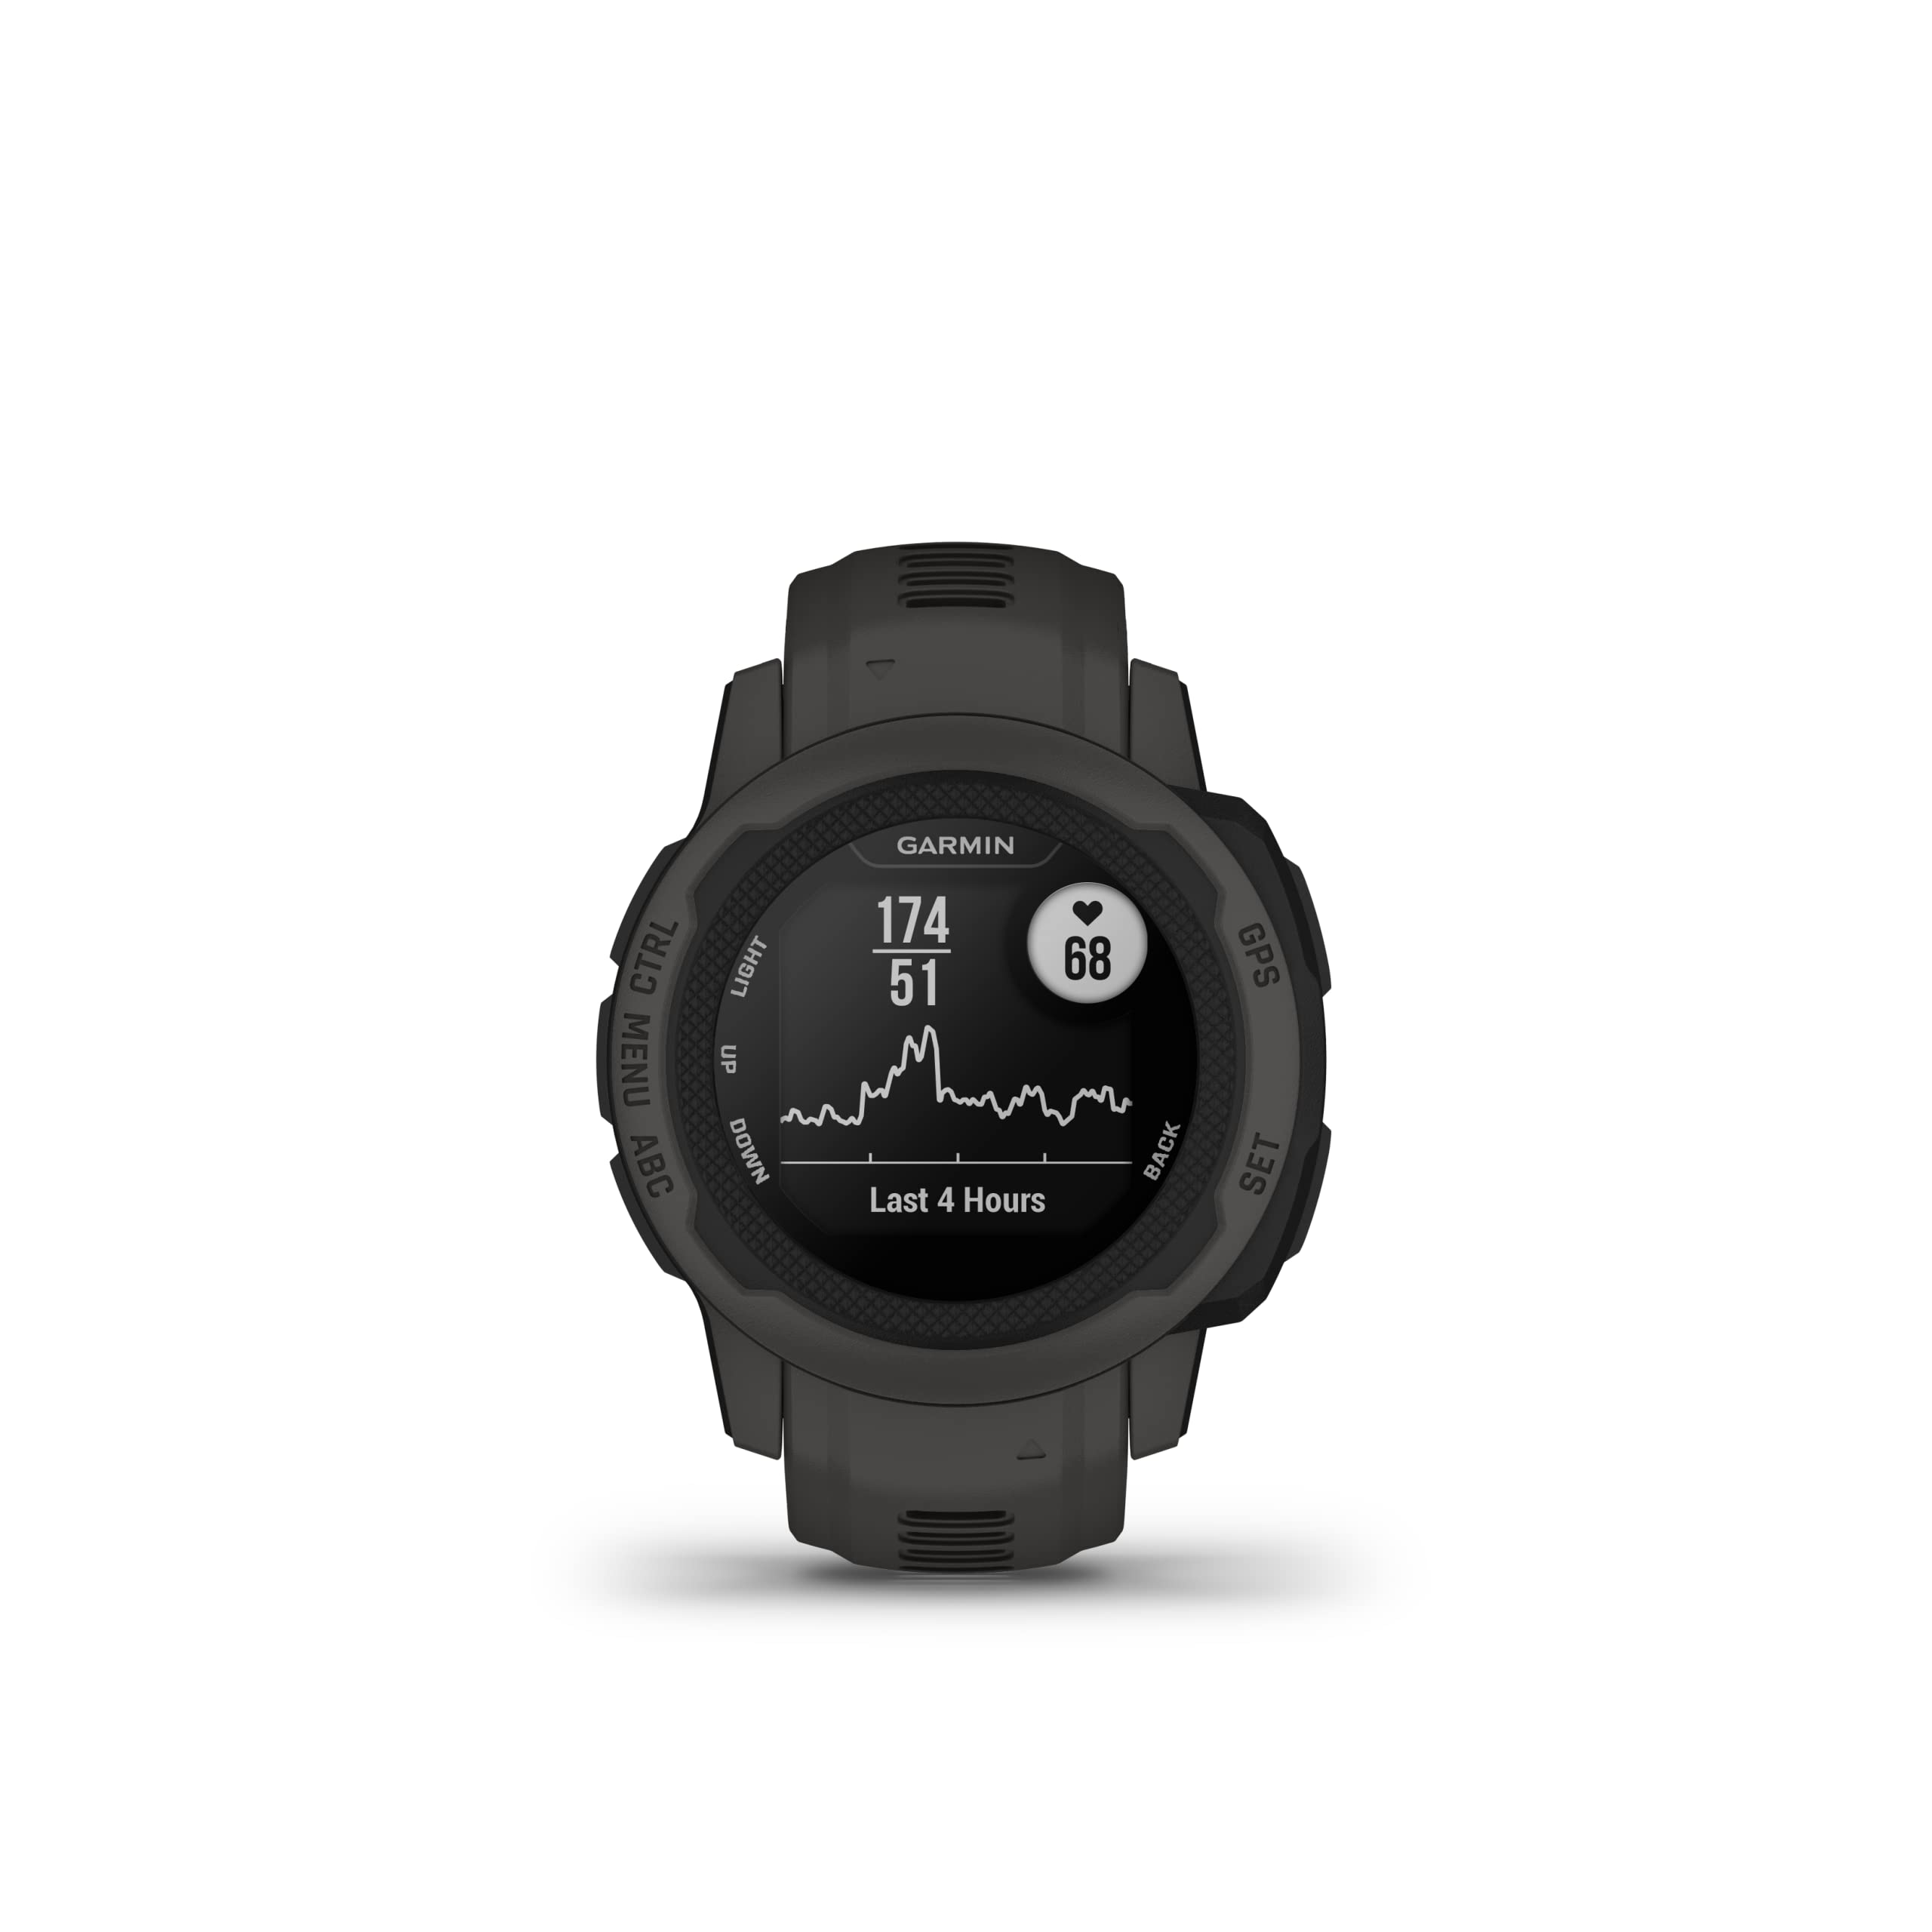 Garmin Instinct 2S, Smaller-Sized GPS Outdoor Watch, Multi-GNSS Support, Tracback Routing, Graphite